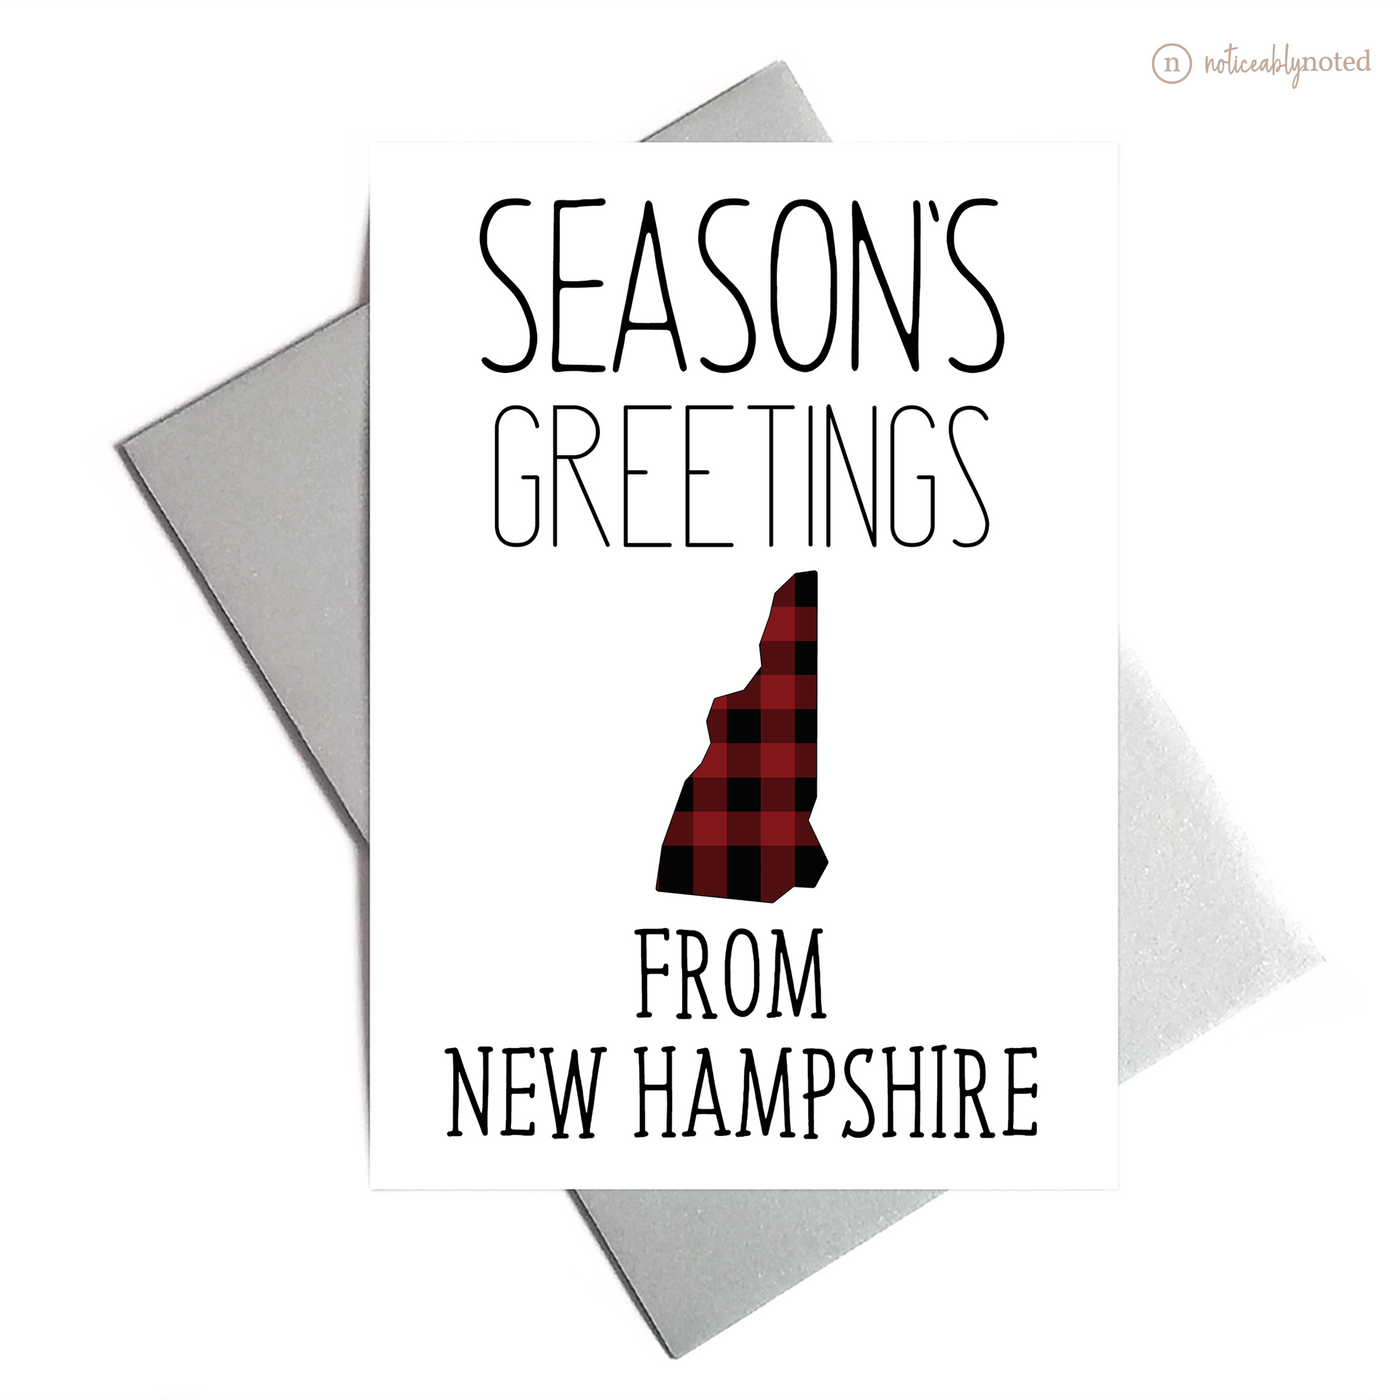 New Hampshire Christmas Cards | Noticeably Noted